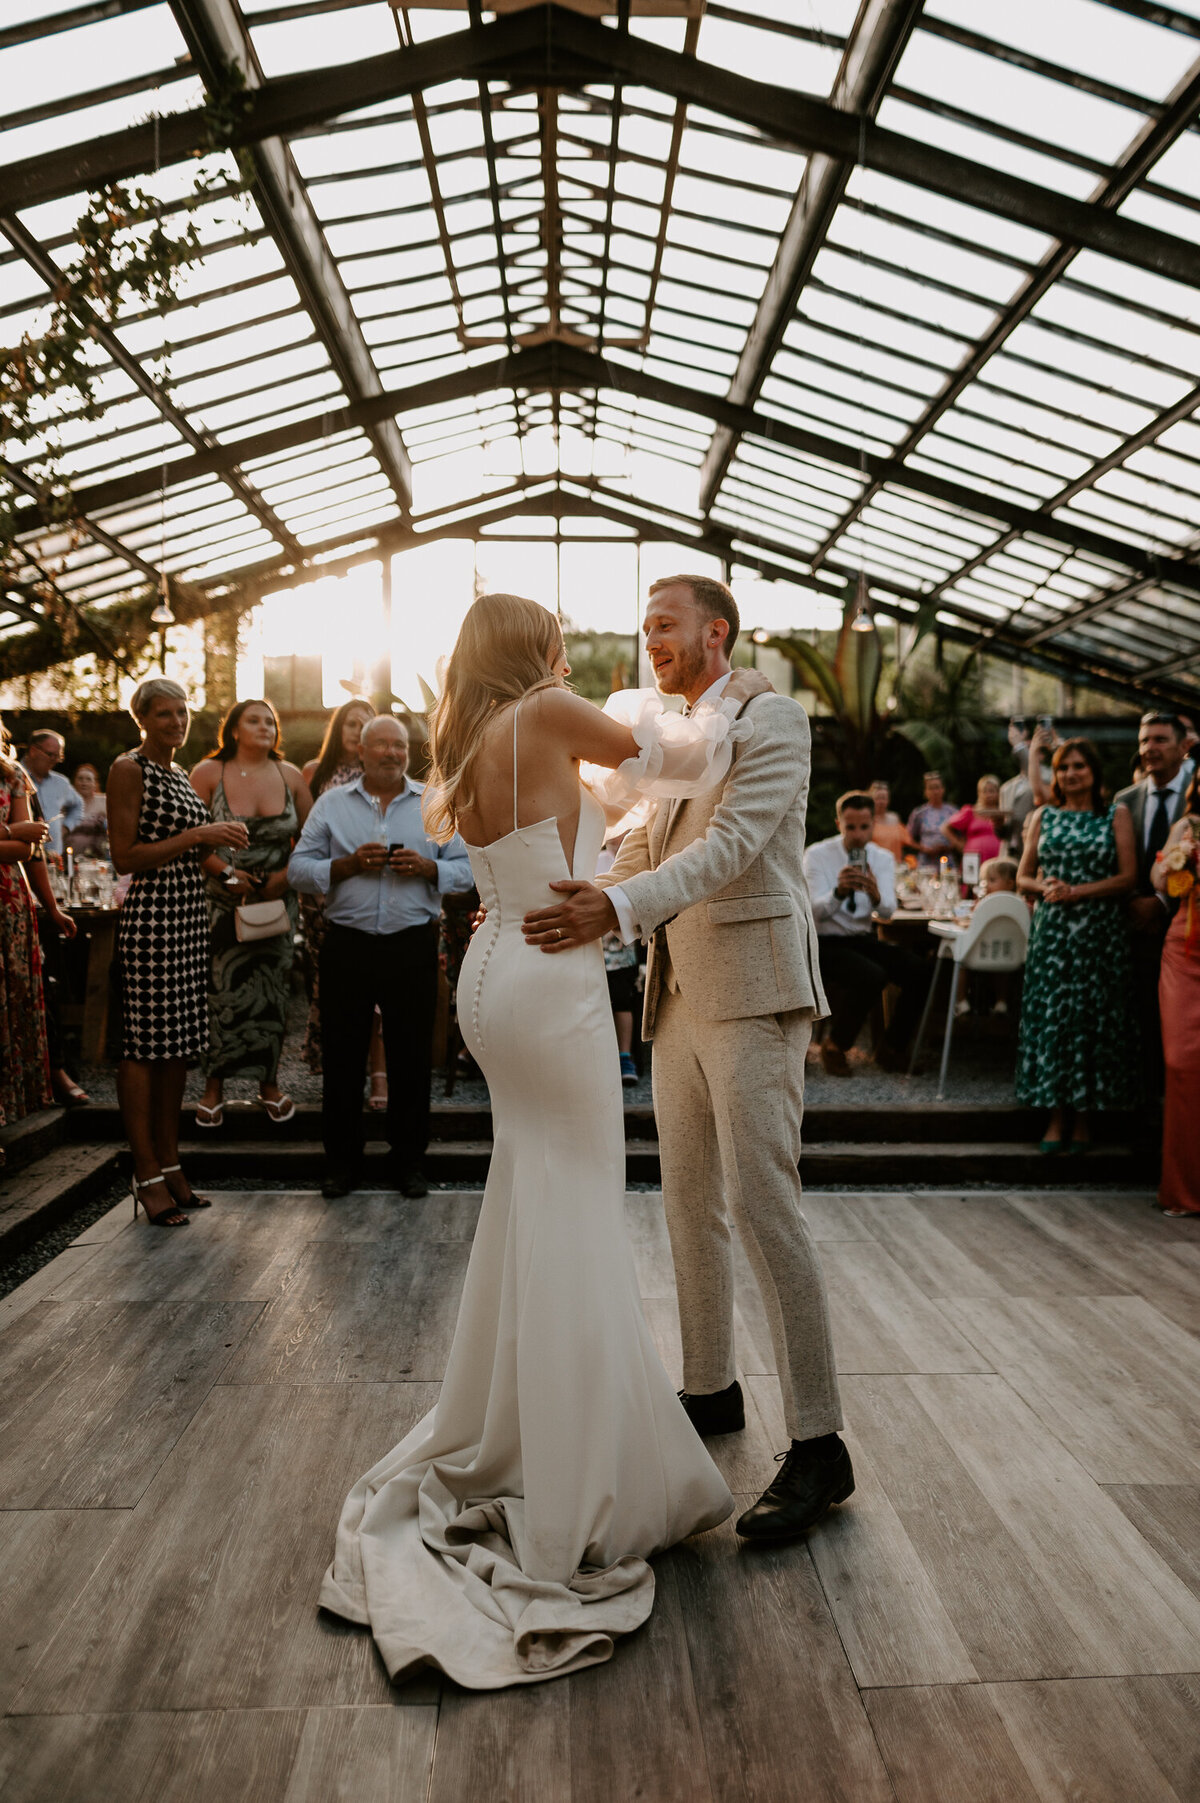 A sunset comes through the glasshouse at ANRAN whilst a bride and groom share their first dance.